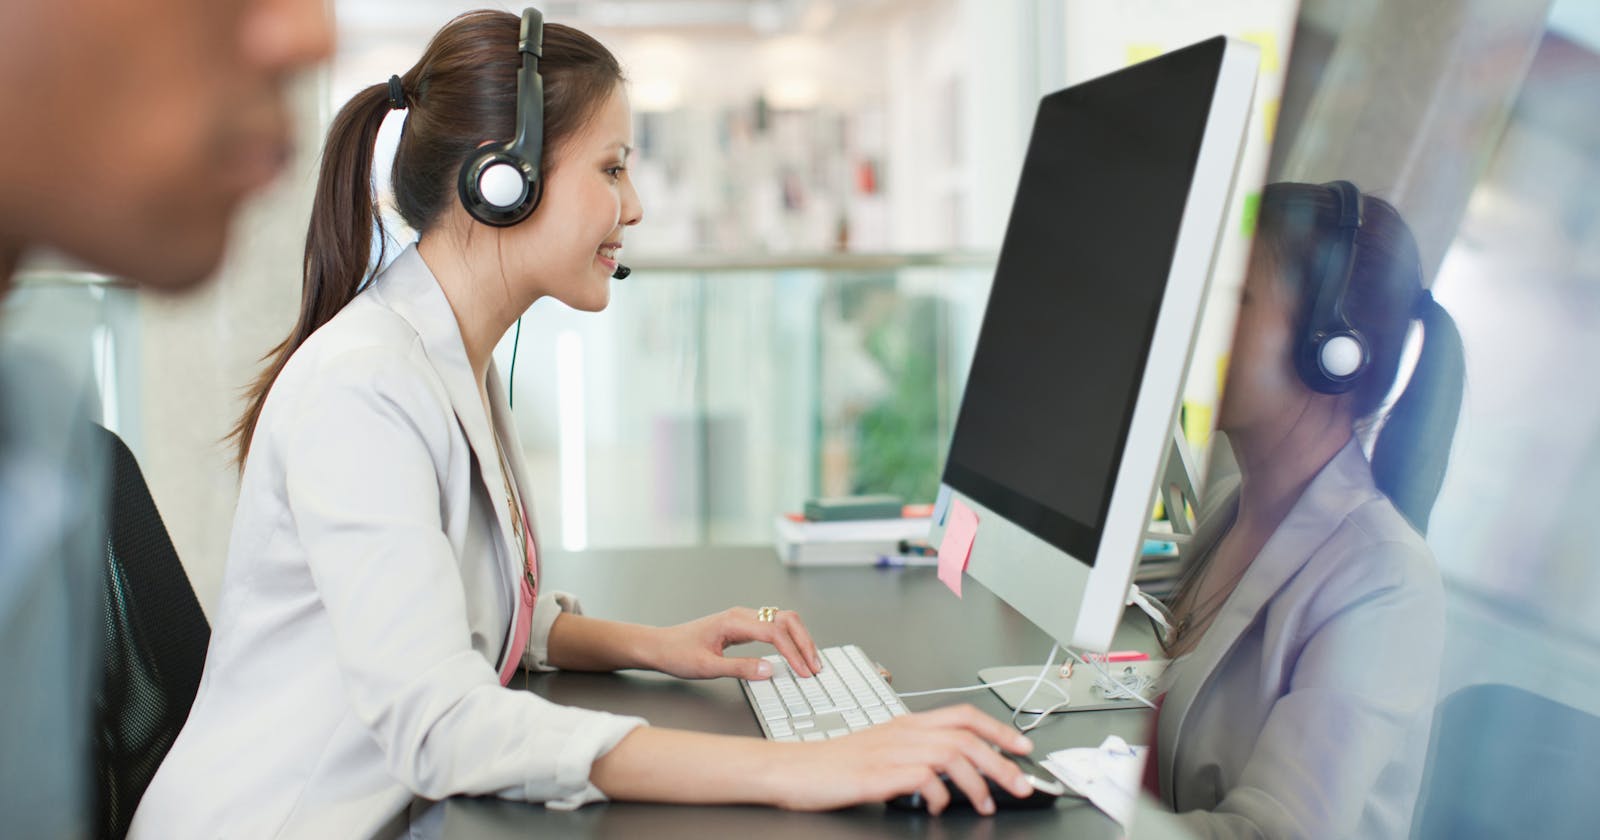 What are the main reasons why businesses use call center solutions?